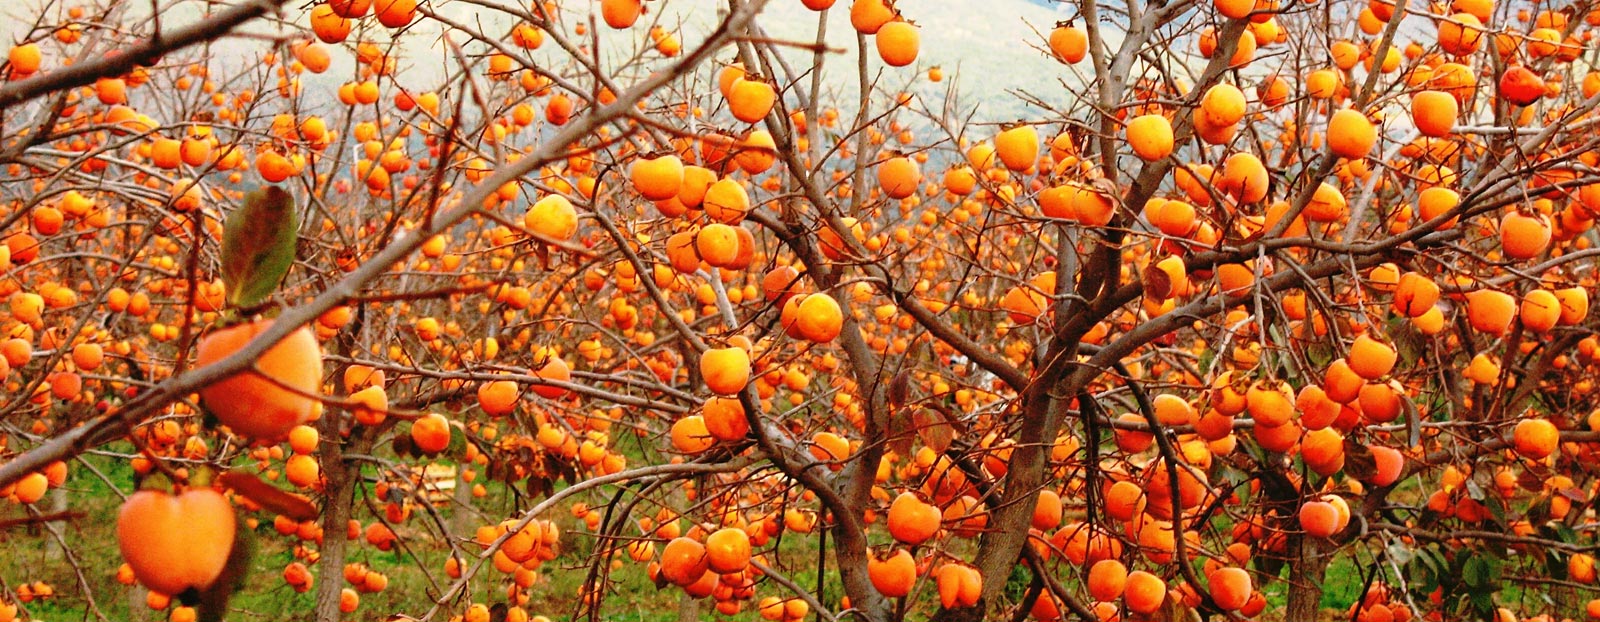 Find the benefits of Persimmon